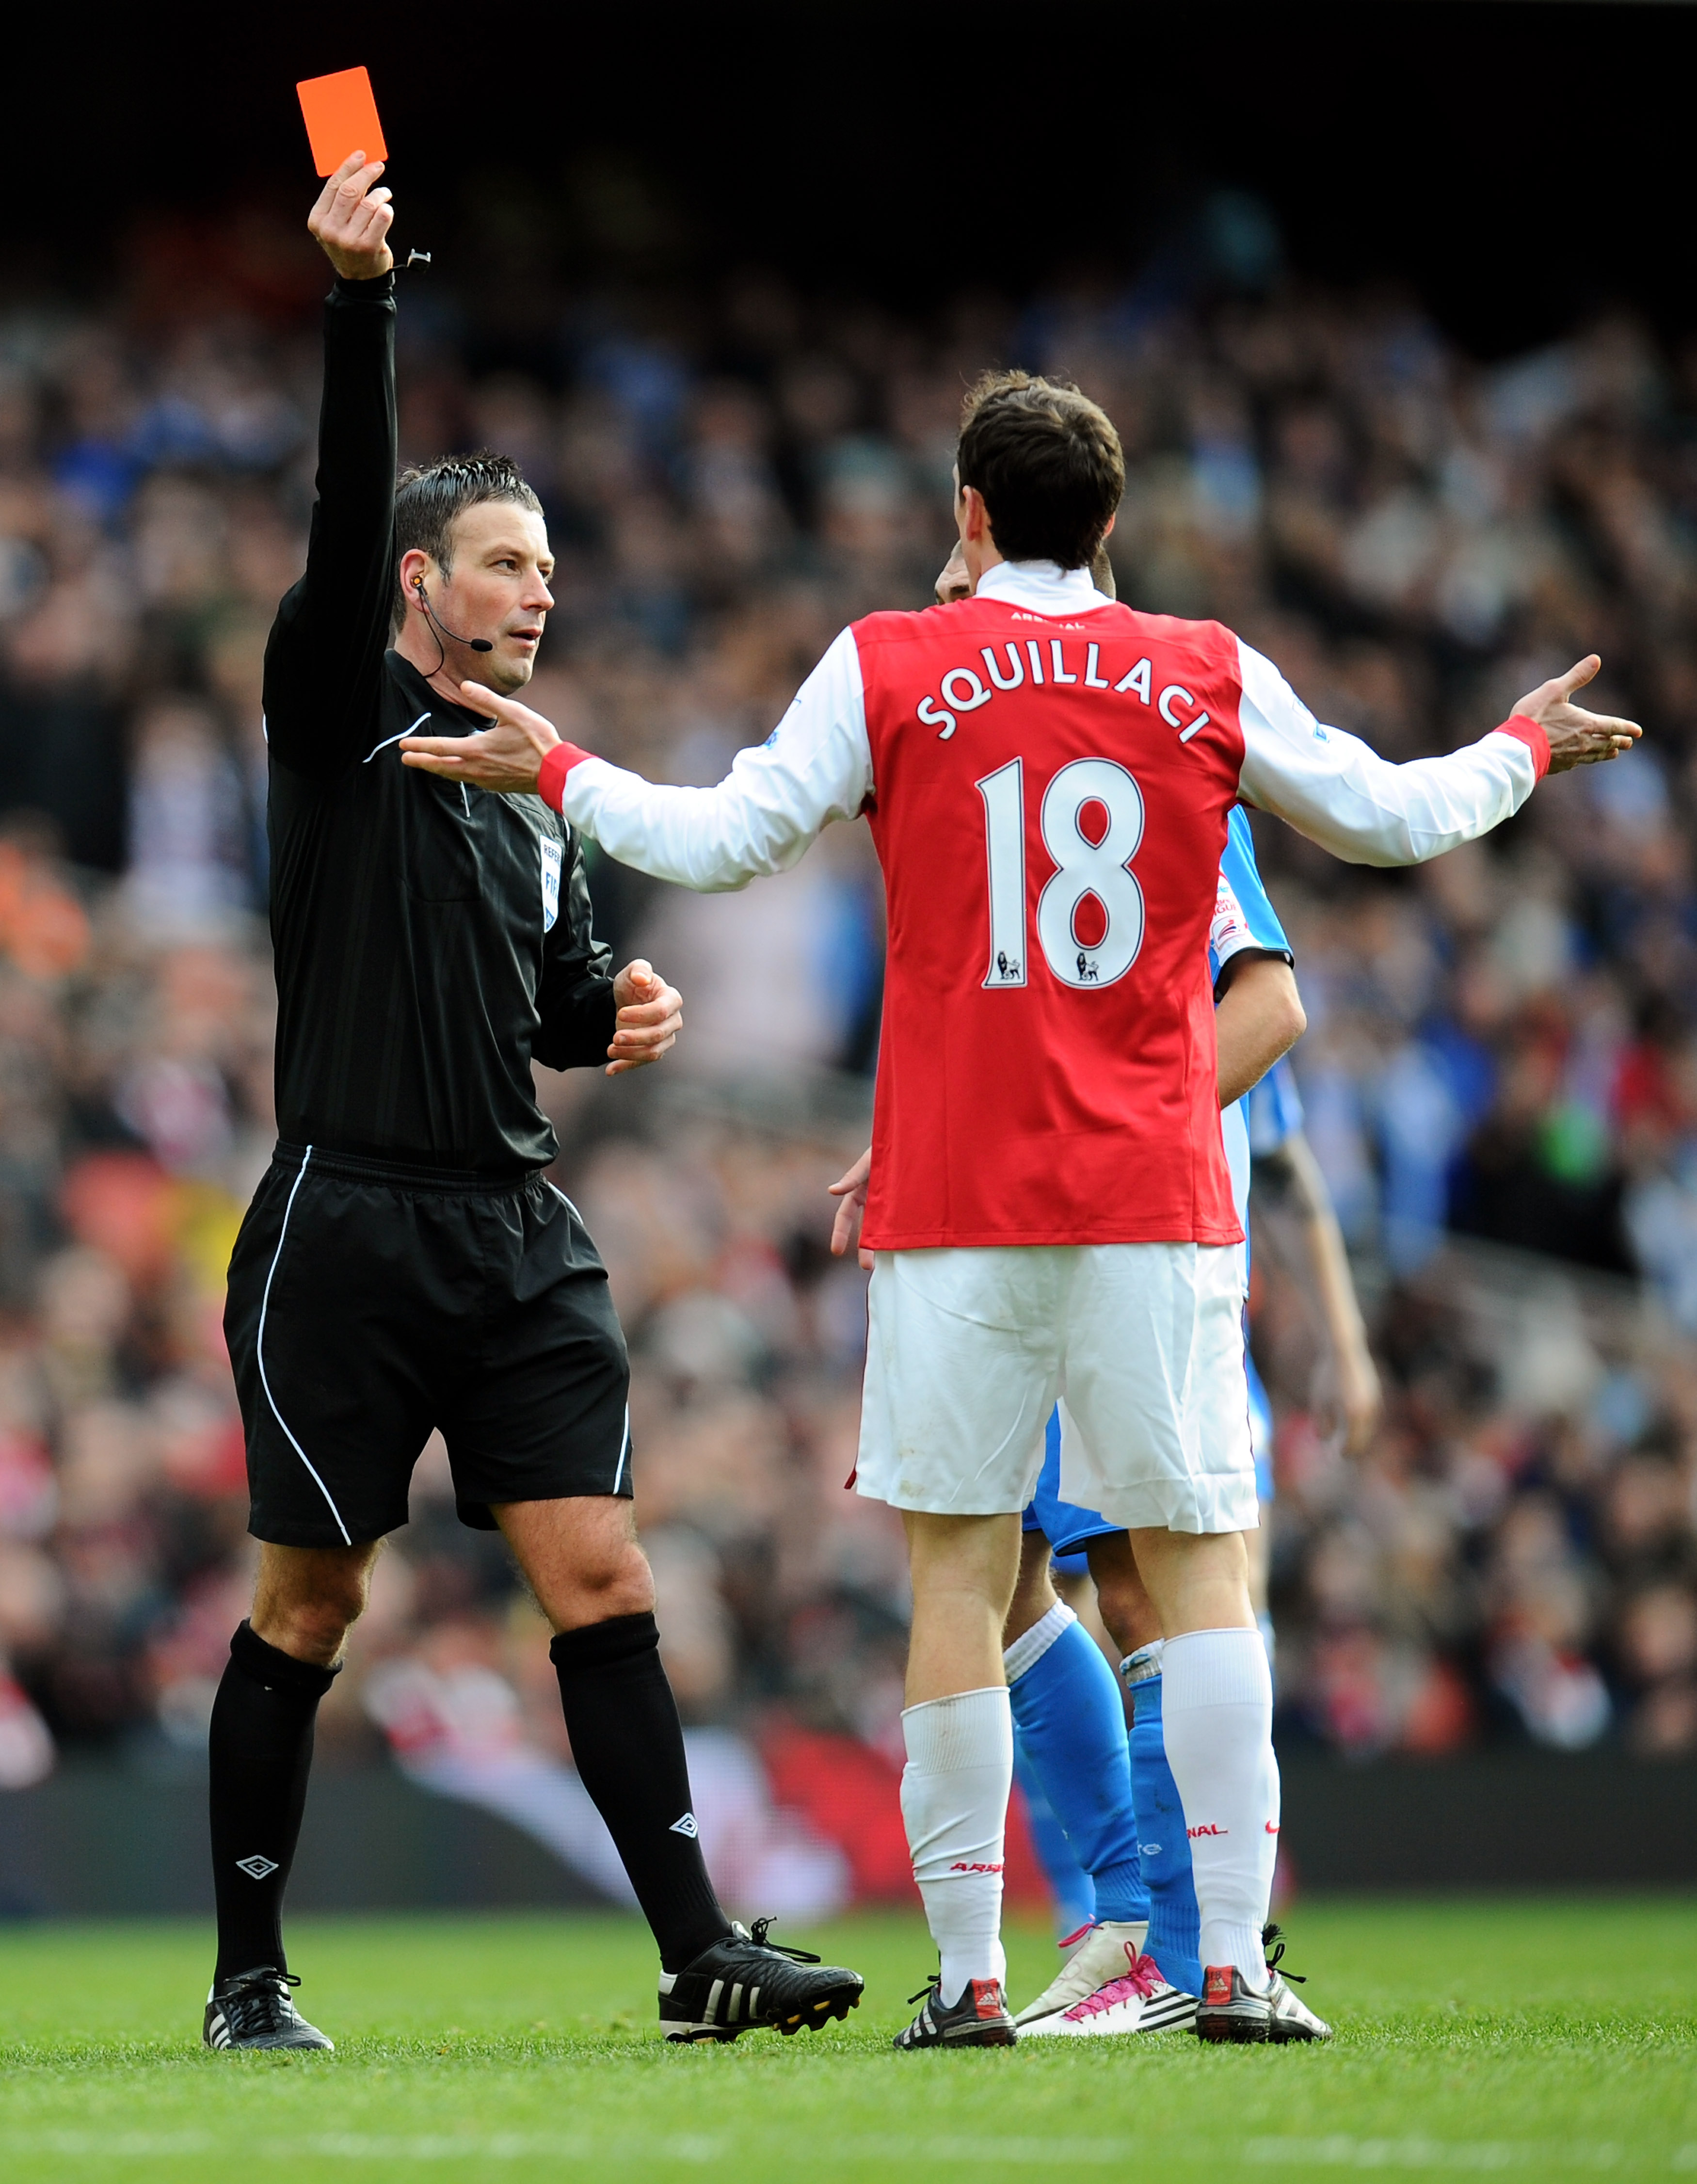 LONDON, ENGLAND - JANUARY 30:  Sebastien Squillaci #30 of Arsenal is shown a straight red card by Referee Mark Clattenburg after his foul on Jack Hunt of Huddersfield during the FA Cup sponsored by E.ON fourth round match between Arsenal and Huddersfield 